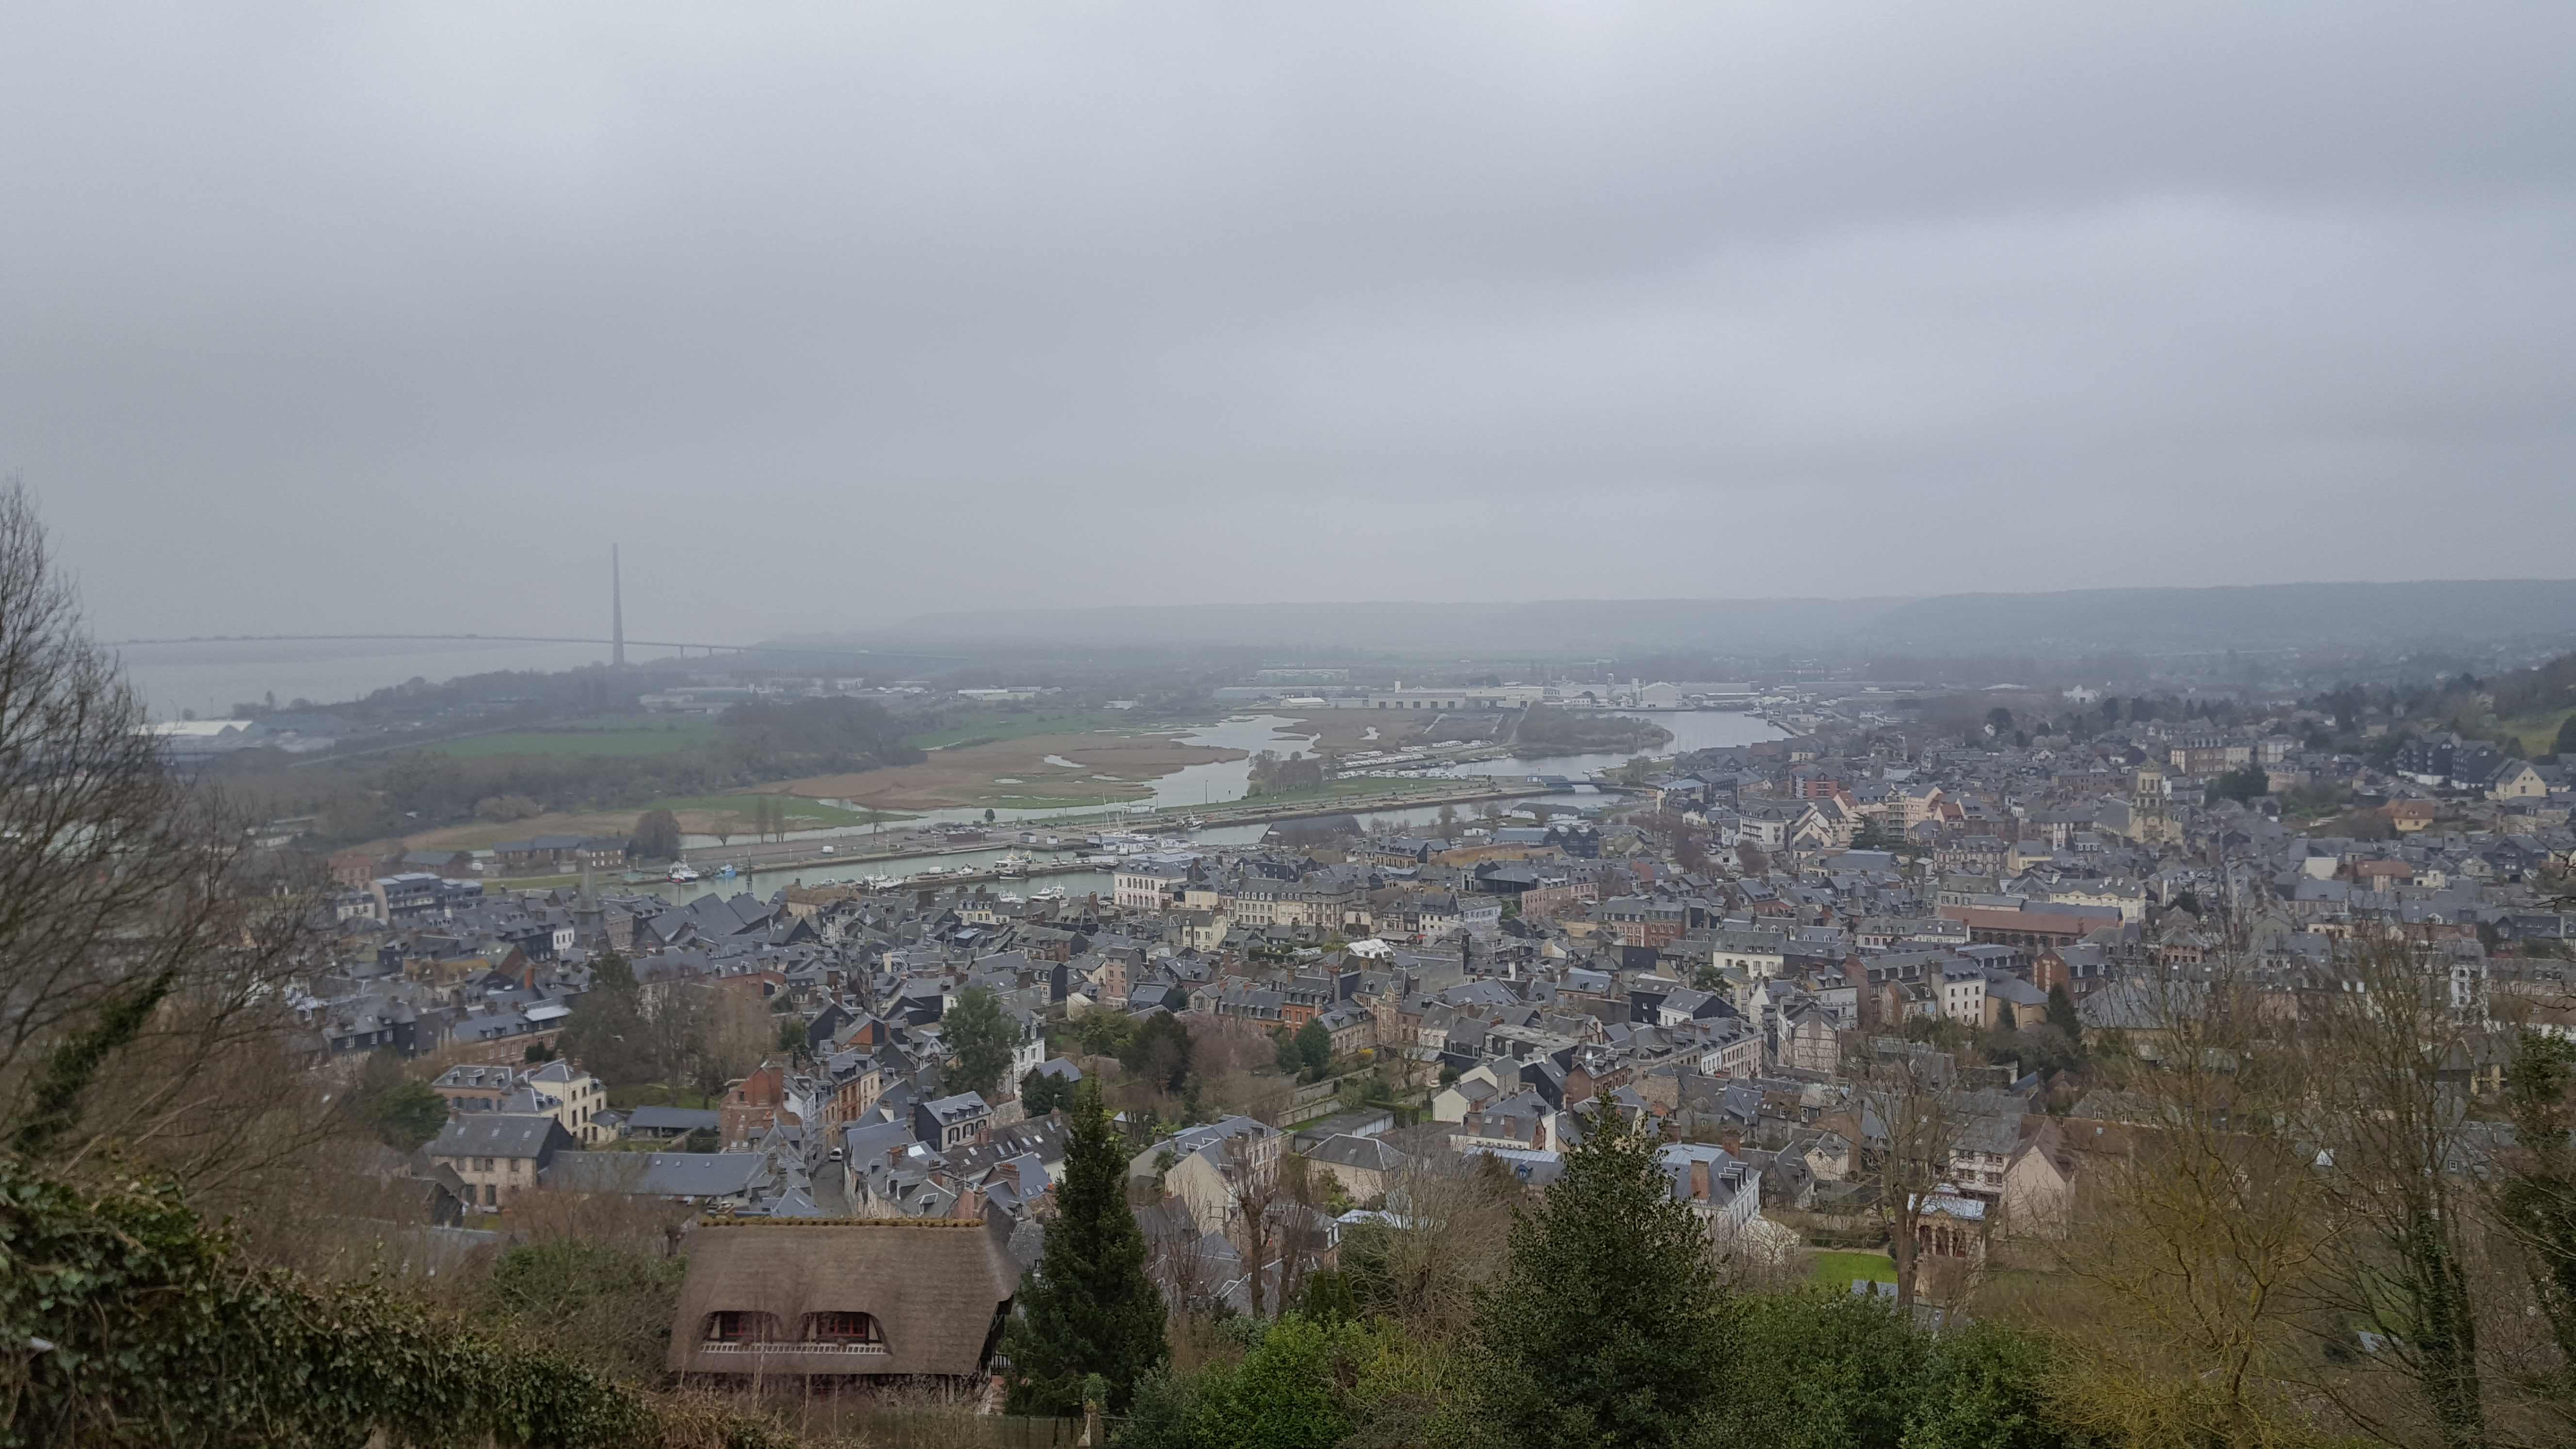 The view over Honfleur to Le Havre